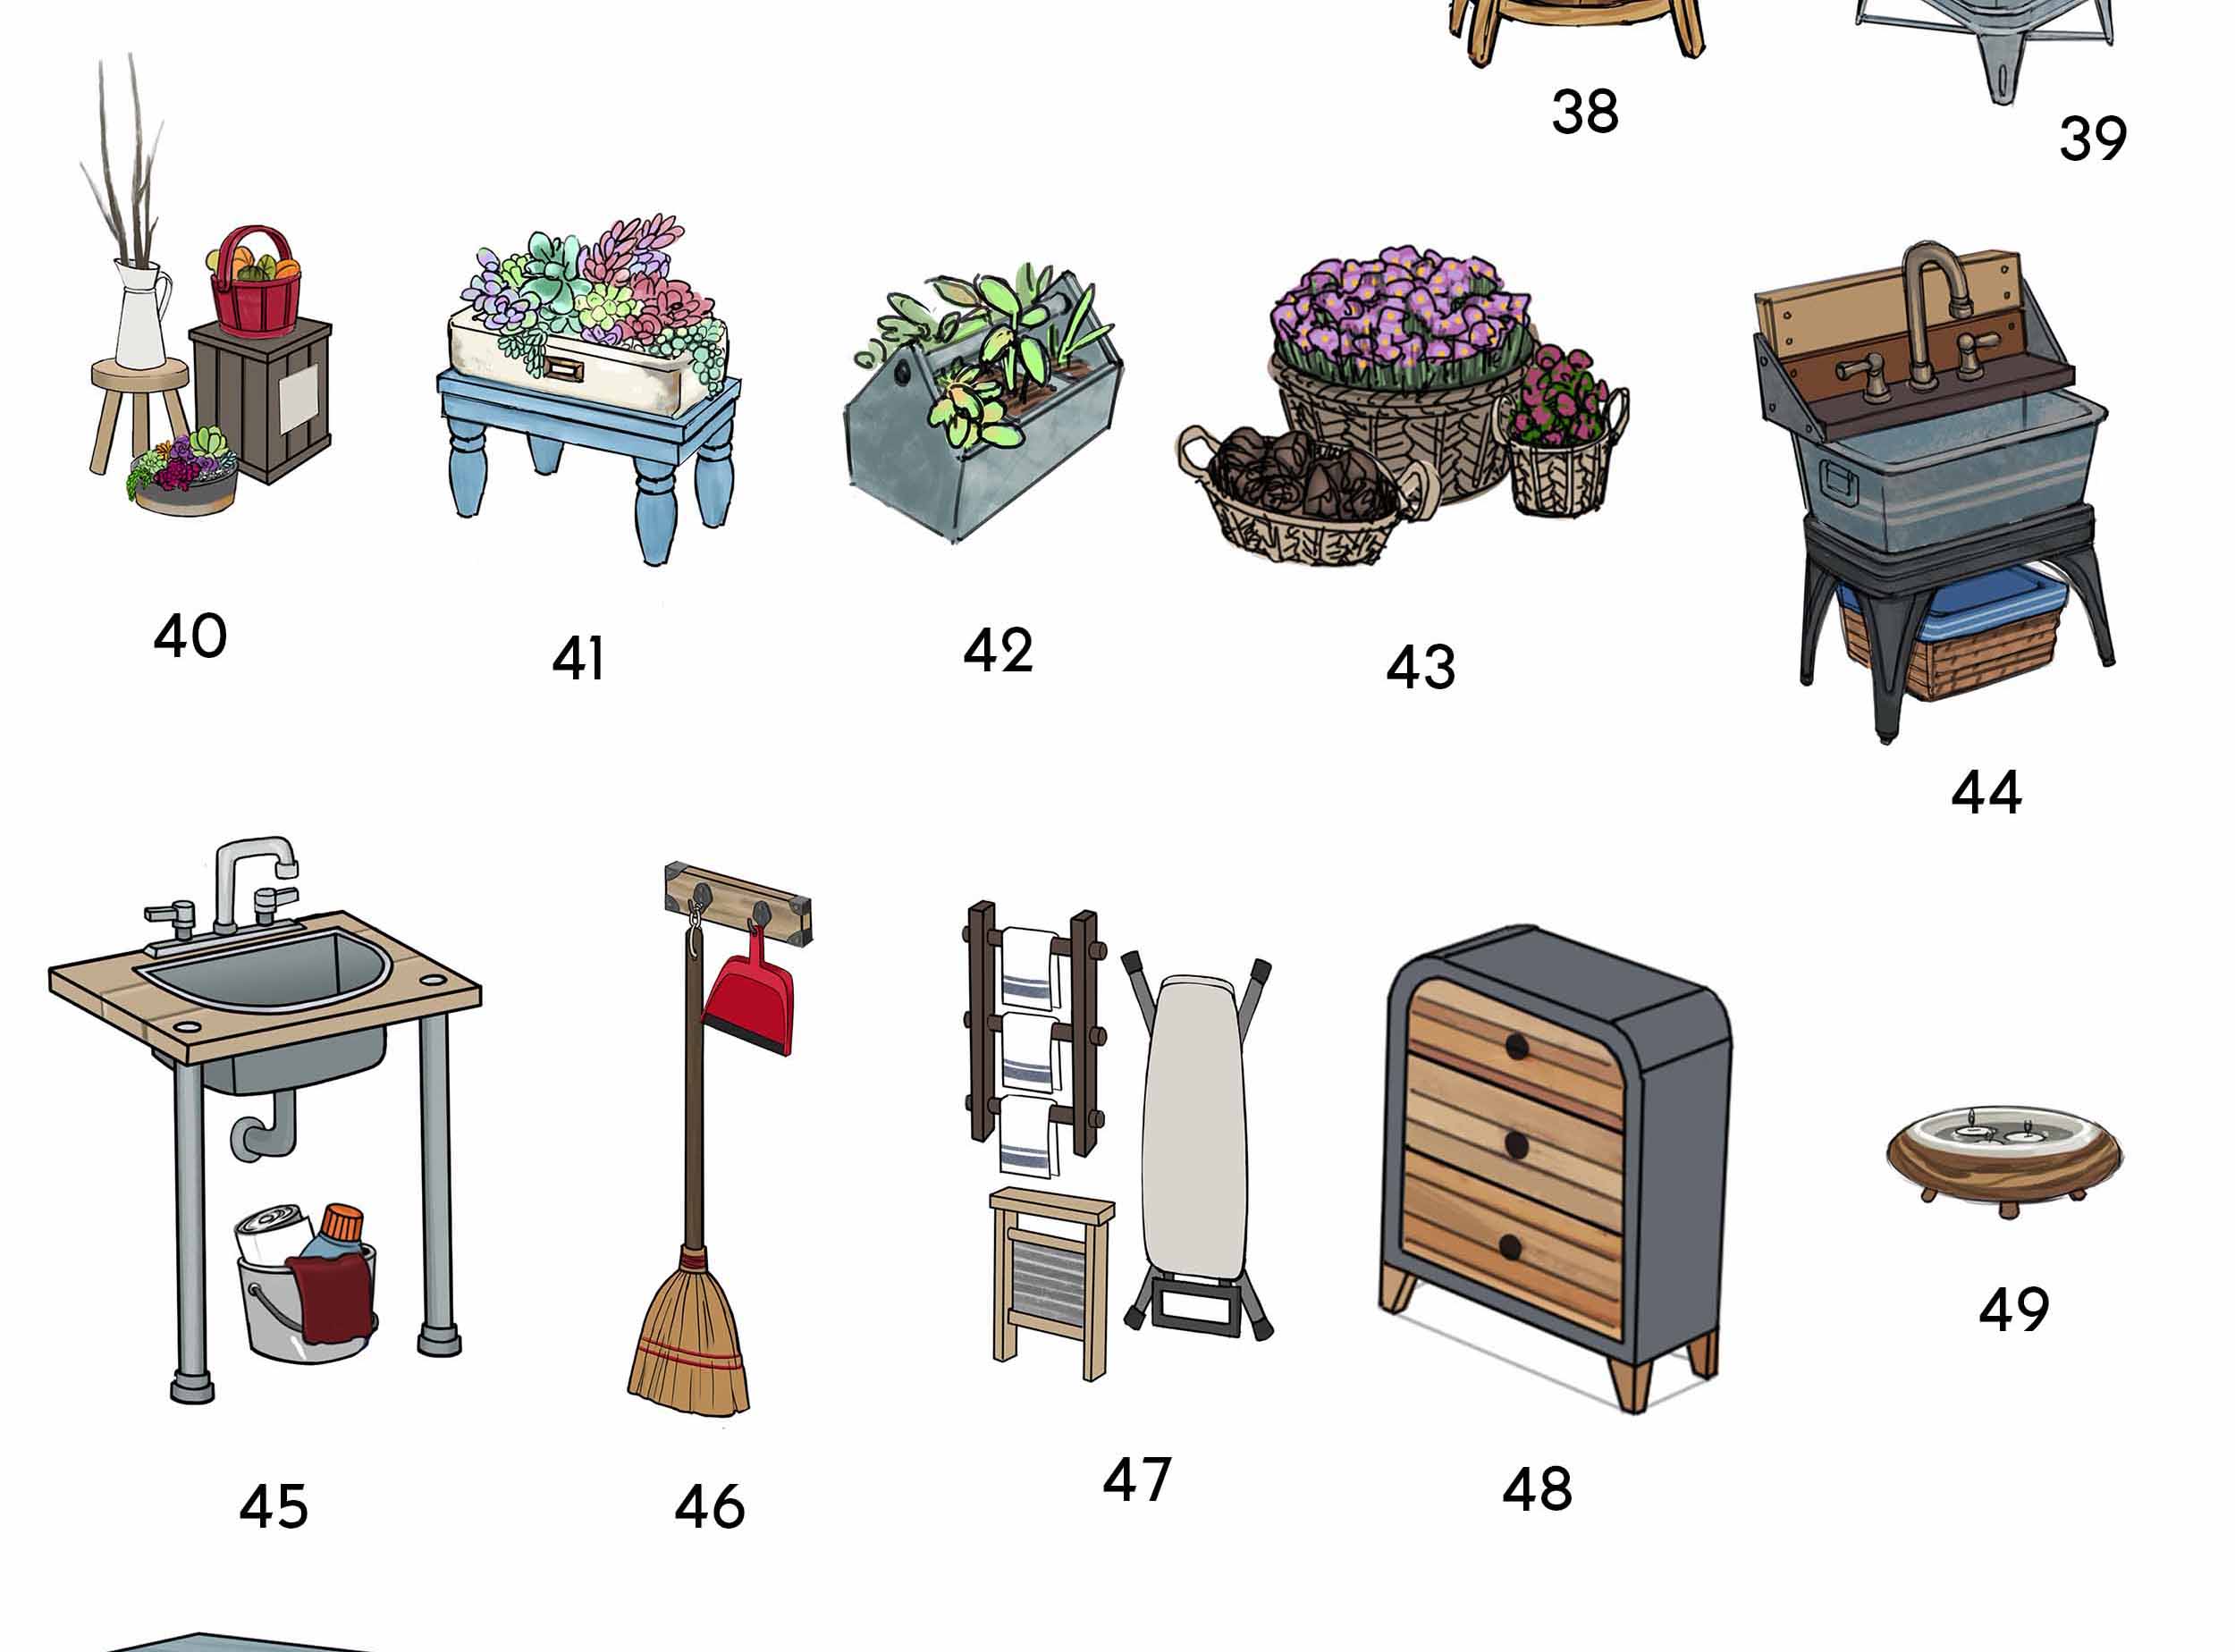 Sims objects. SIMS 4 раковина. SIMS 4 objects cc. Симс 4 деревенская мебель. Деревенская печь симс 4.